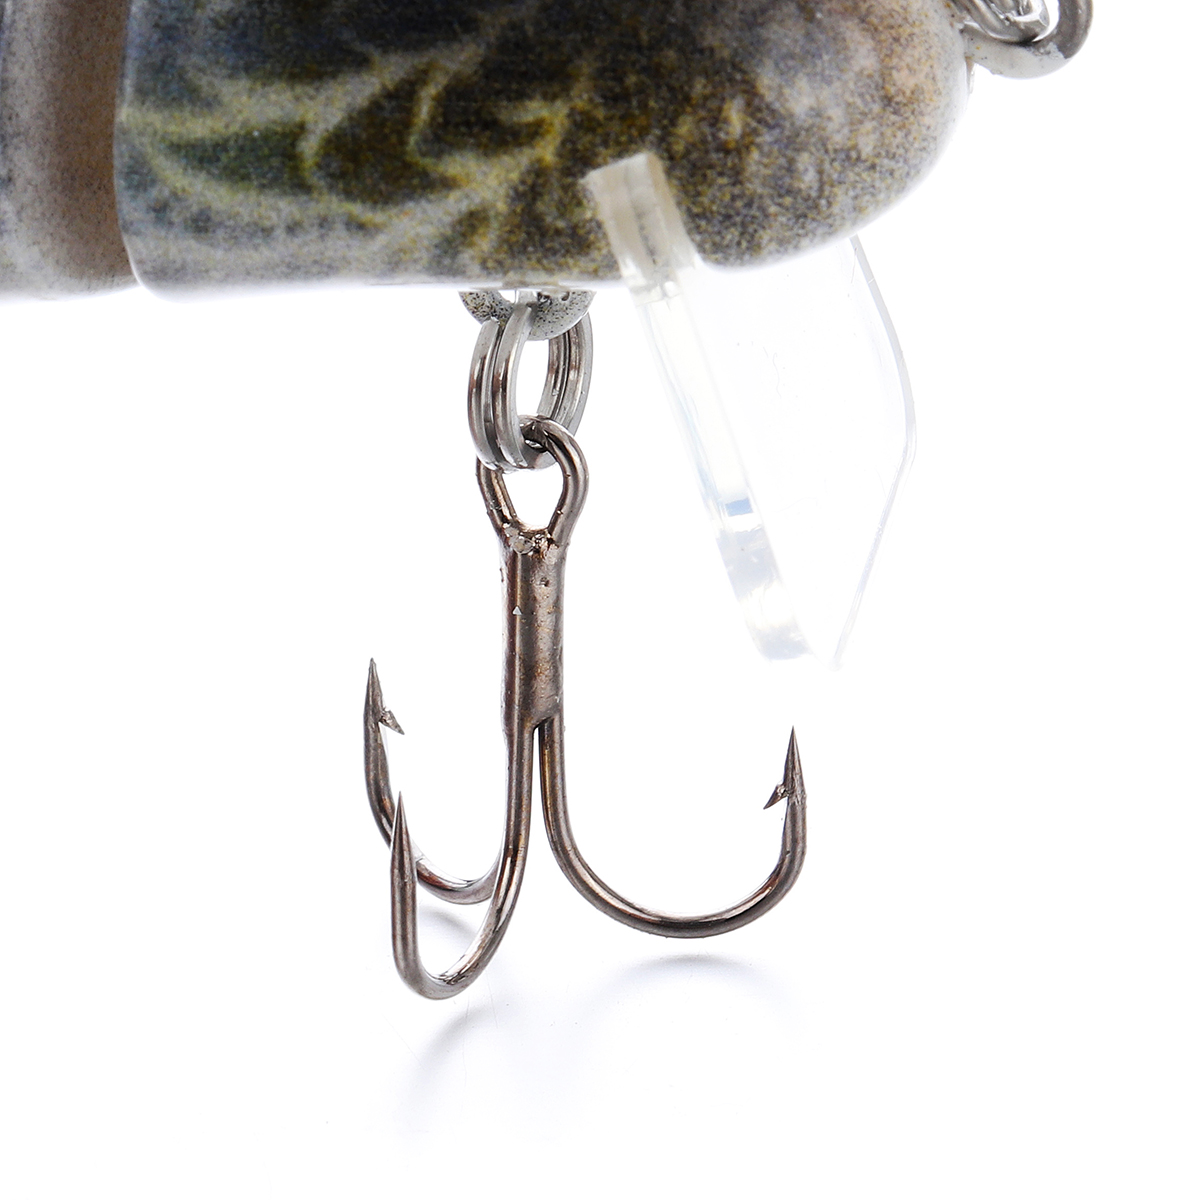 3D-Eyes-Duck-Lure-Artificial-Fishing-Bait-Catching-Topwater-With-Hooks-Fishing-1496193-10